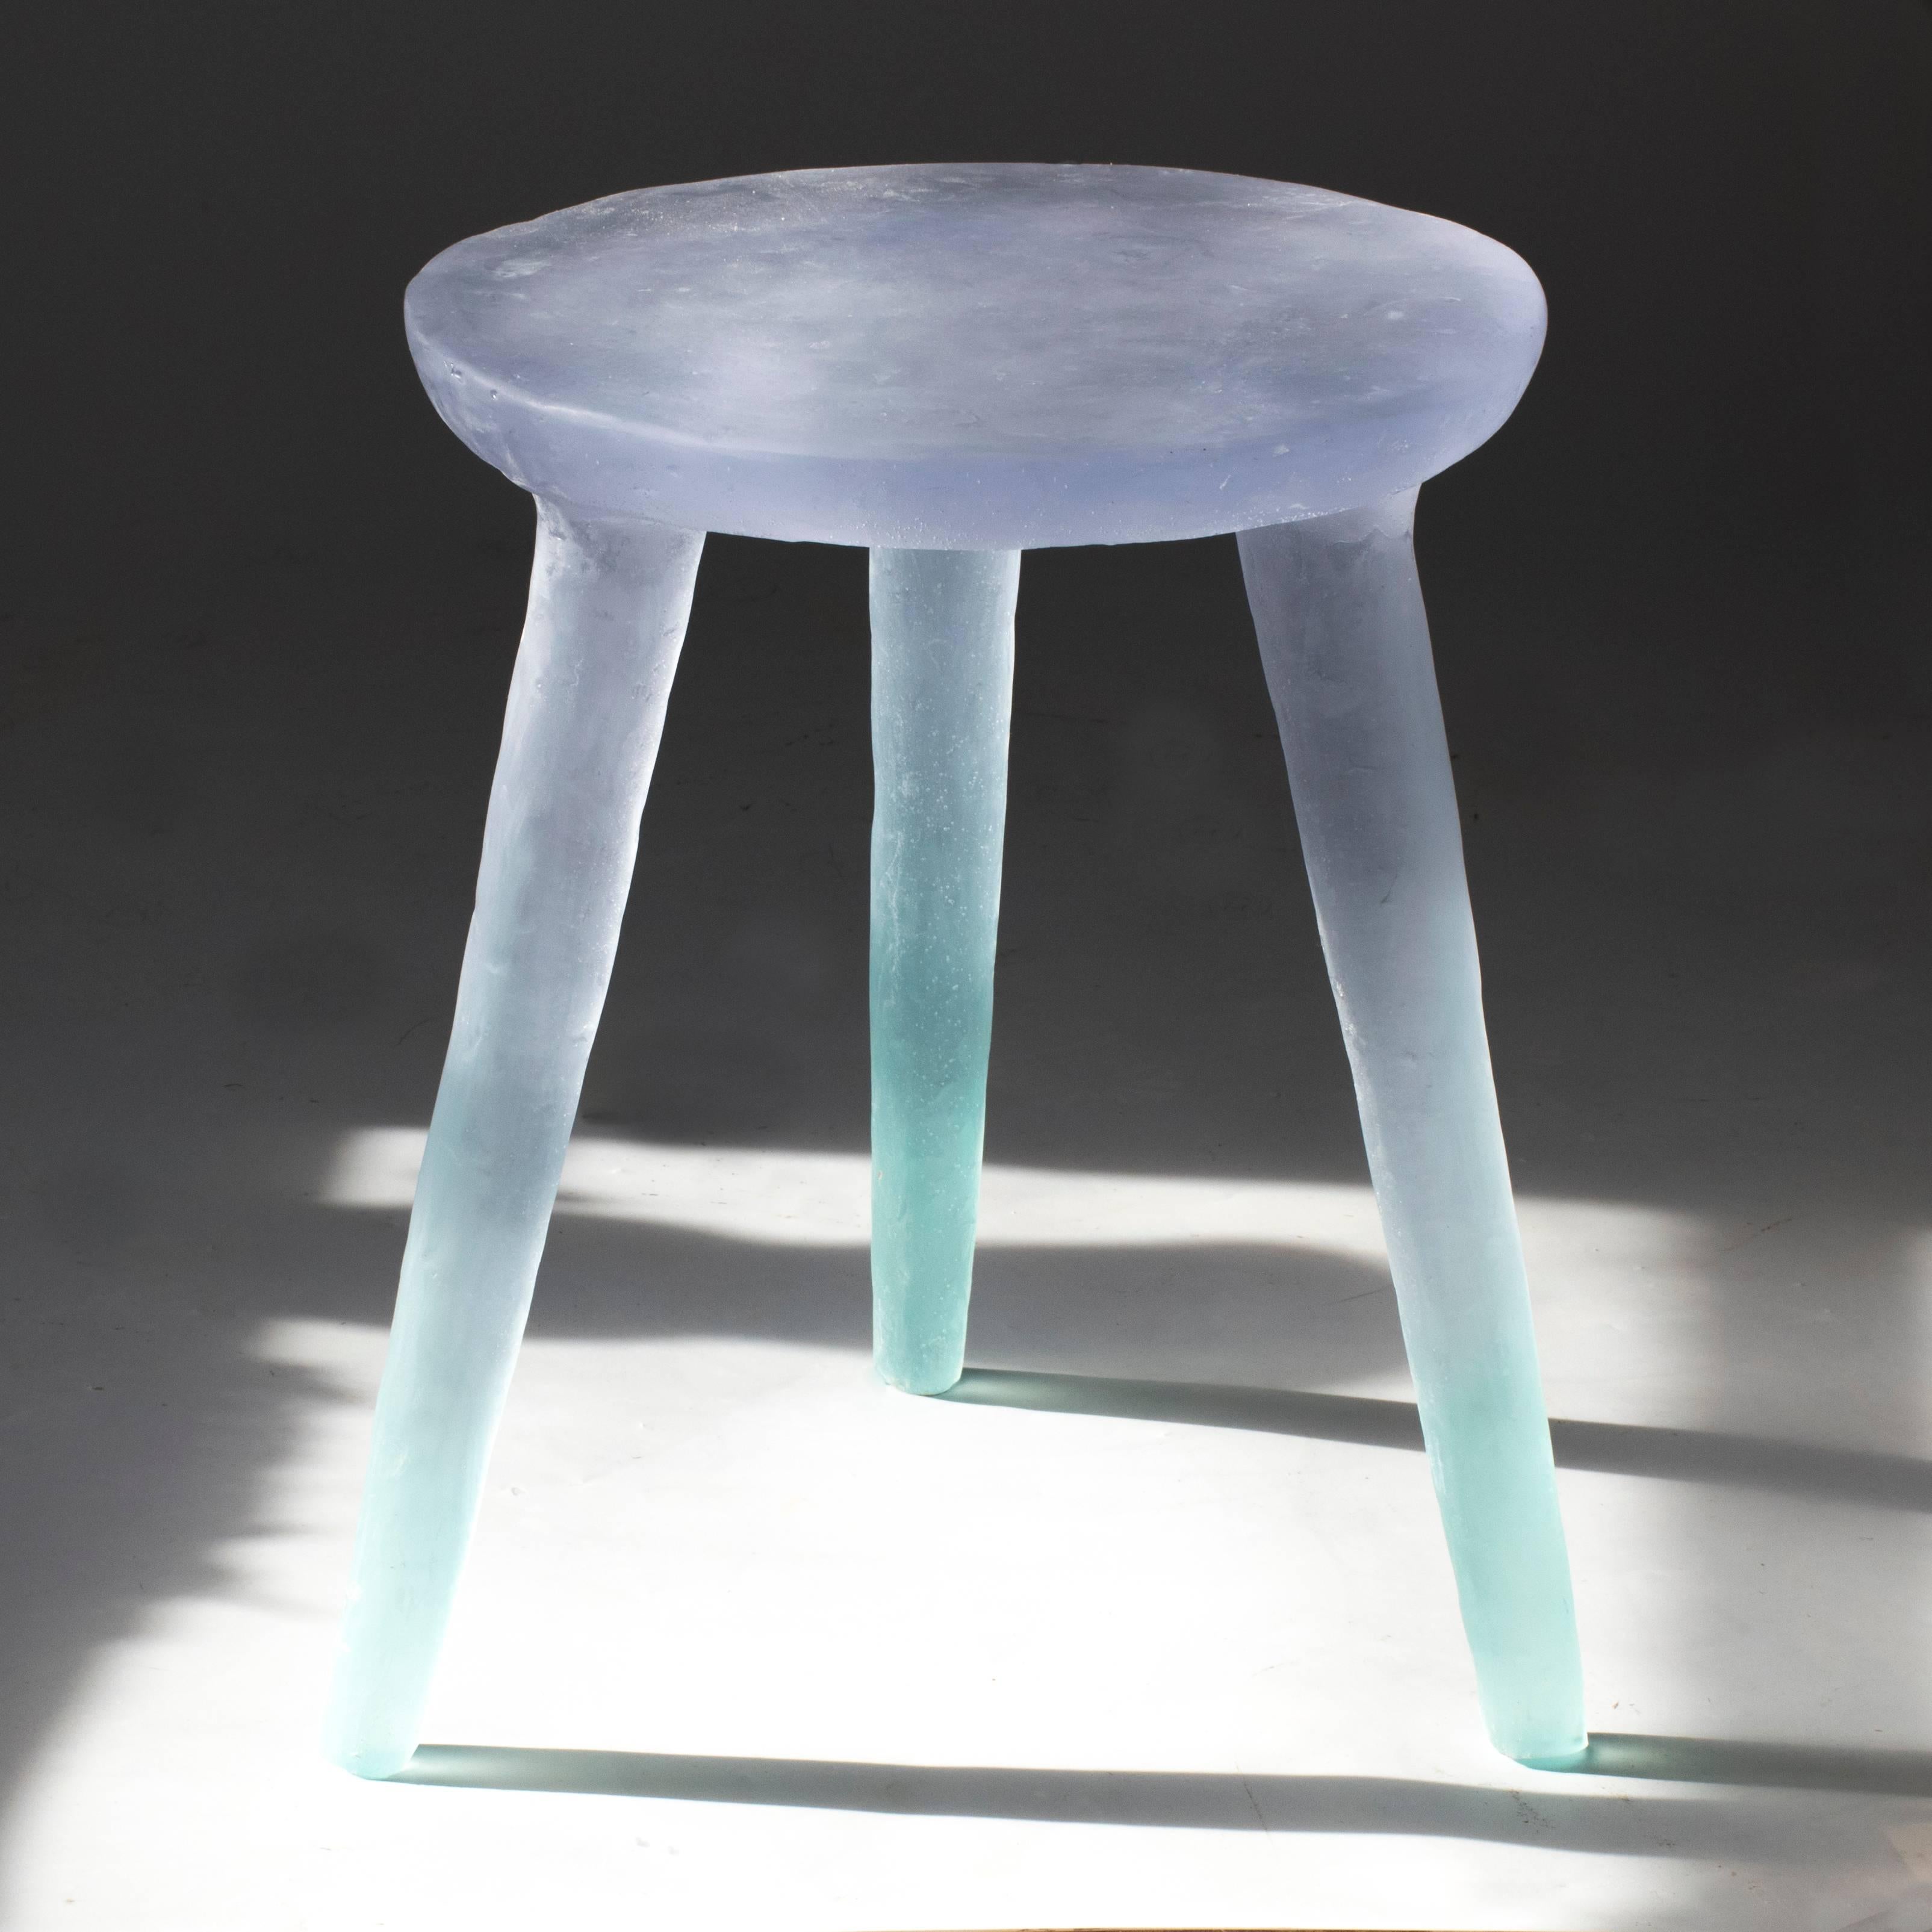 American Glow Side Table or Stool in Periwinkle to Aqua, Handmade from Recycled Resin For Sale